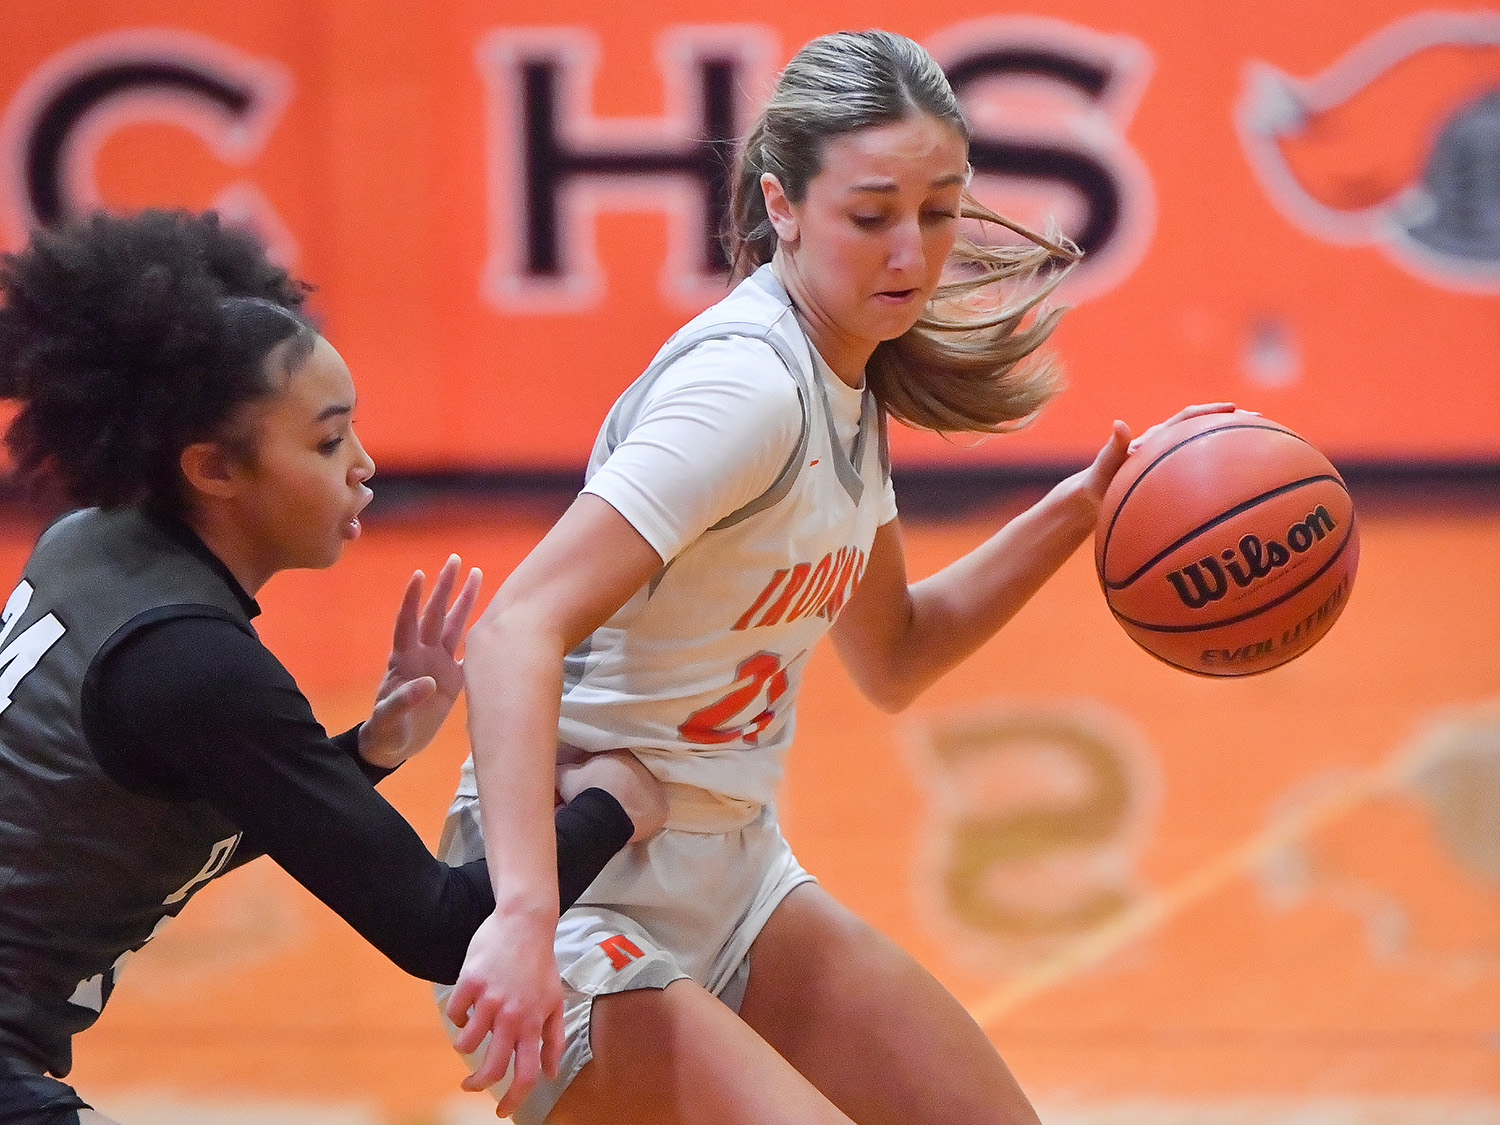 Olivia Corson leads Community to Victory in Regional Basketball Game